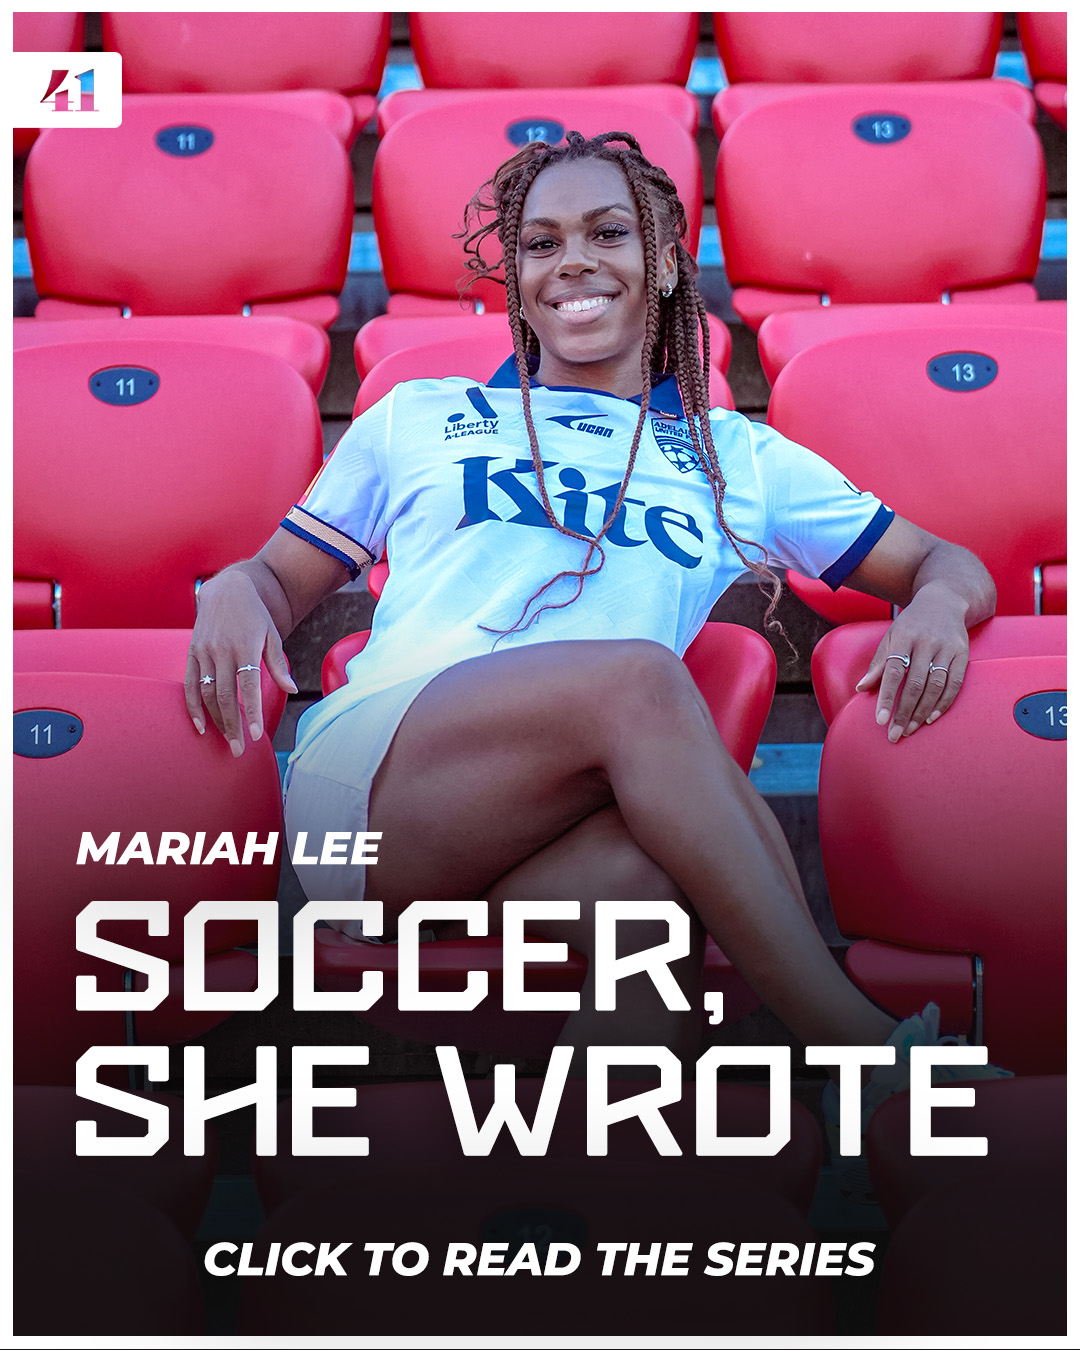 Mariah Lee sitting in the stands of a stadium with the text "soccer she wrote" overlaid below her